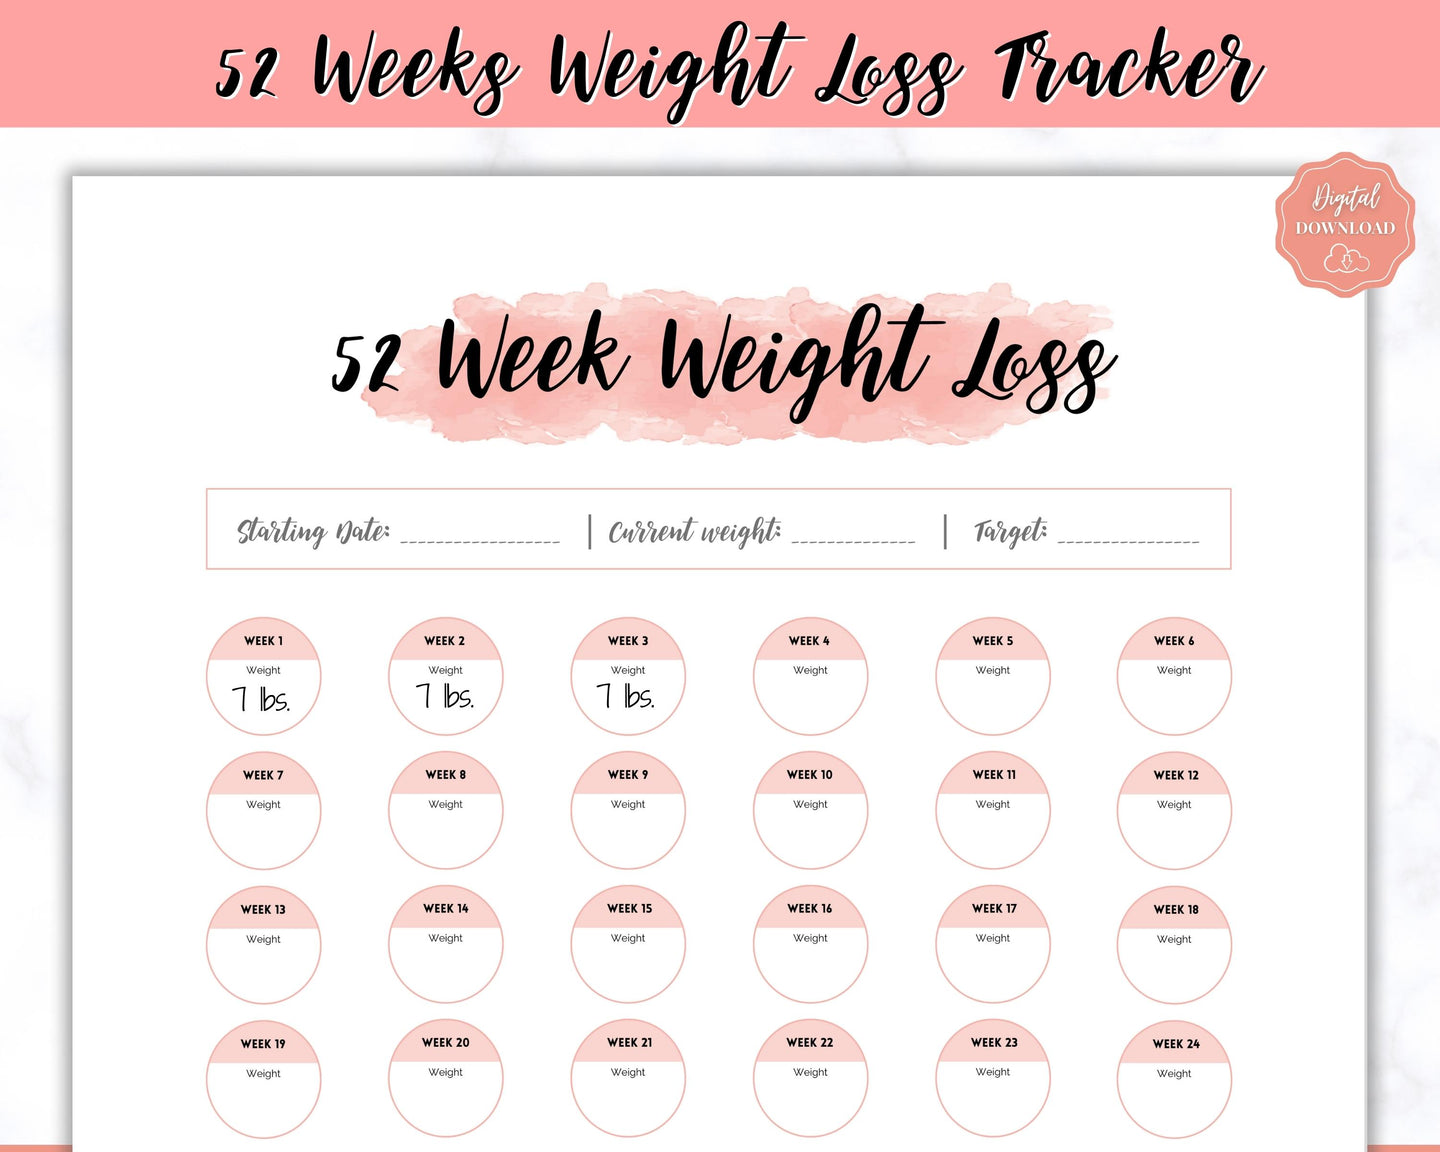 52 Week Weight Loss Tracker & Monthly Challenge | Weight Loss Chart, Pounds Lost Fitness Tracker | Pink Swash